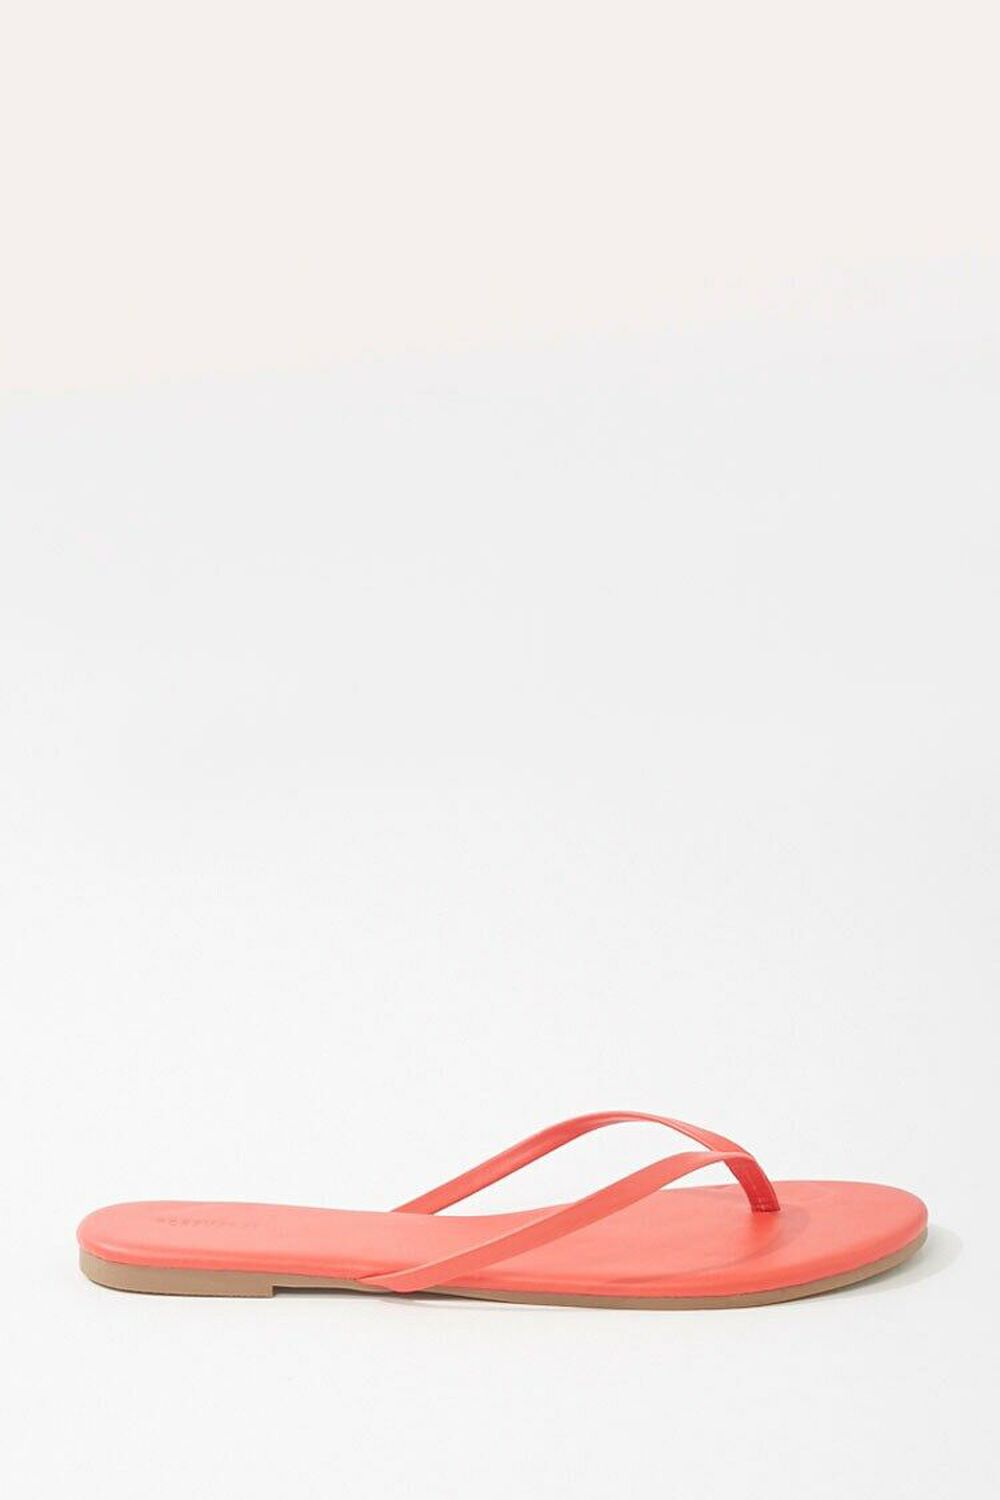 RED Faux Leather Flip Flops, image 1